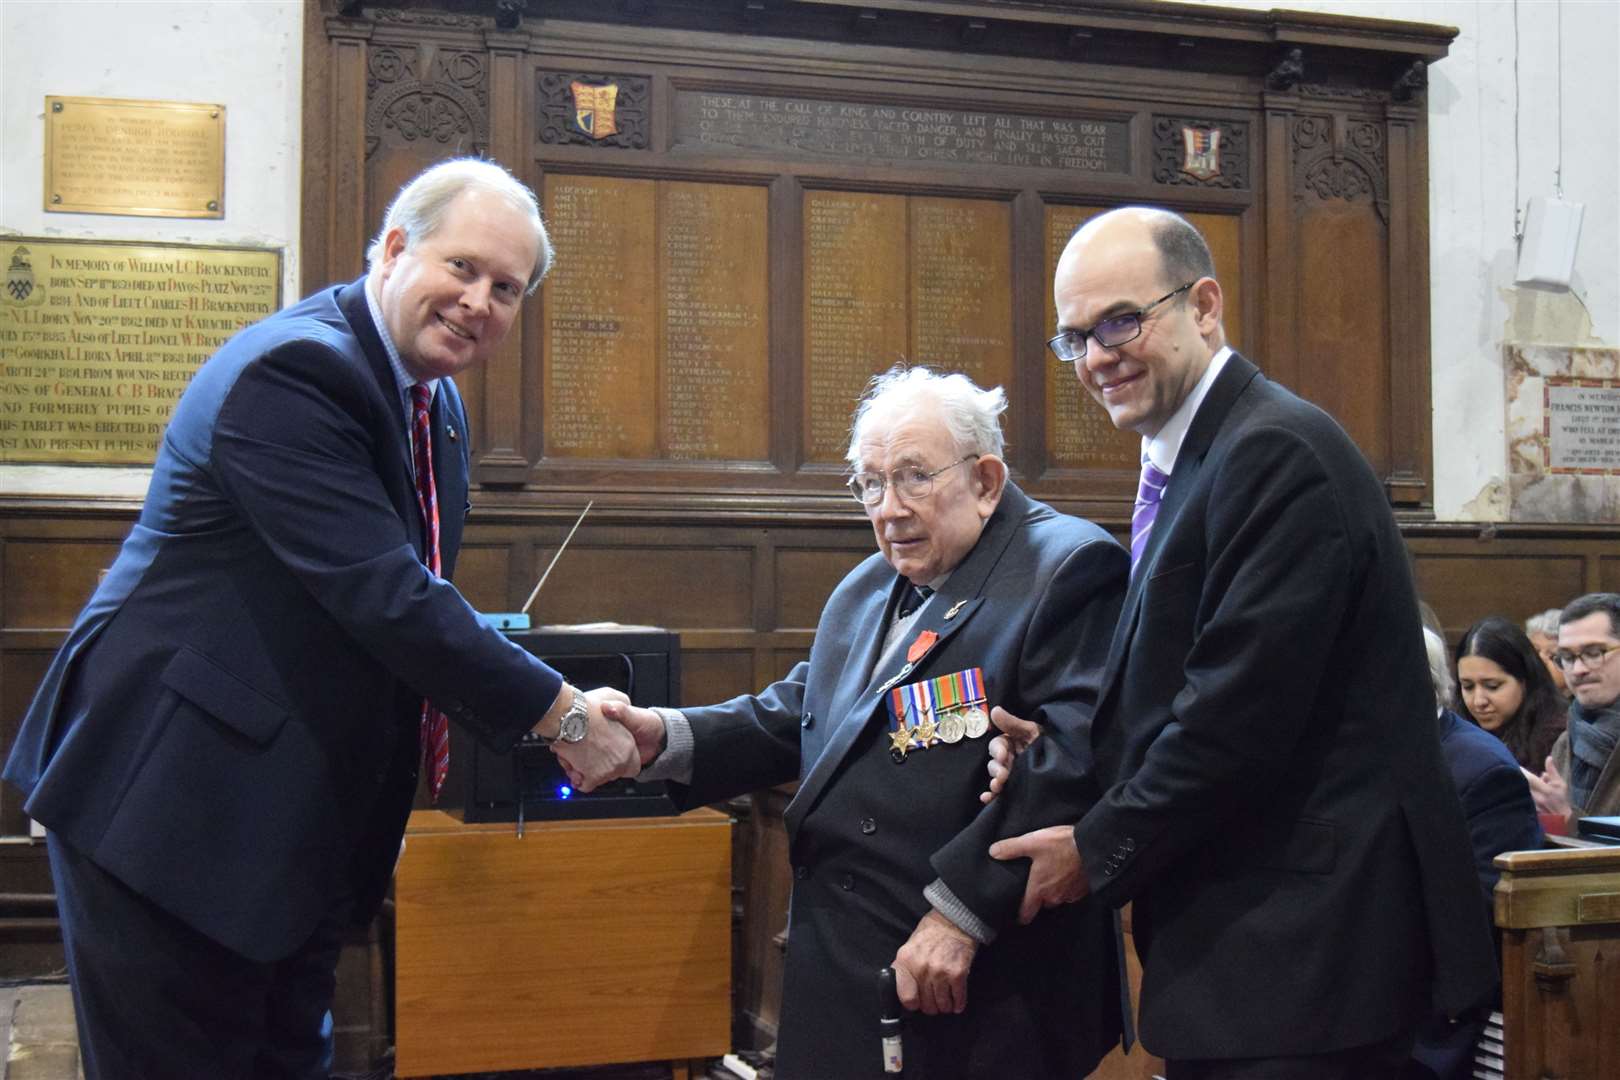 Leslie Nower receiving the Legion d'Honneur at a ceremony at Dover College in 2016. Picture from Chris Townend